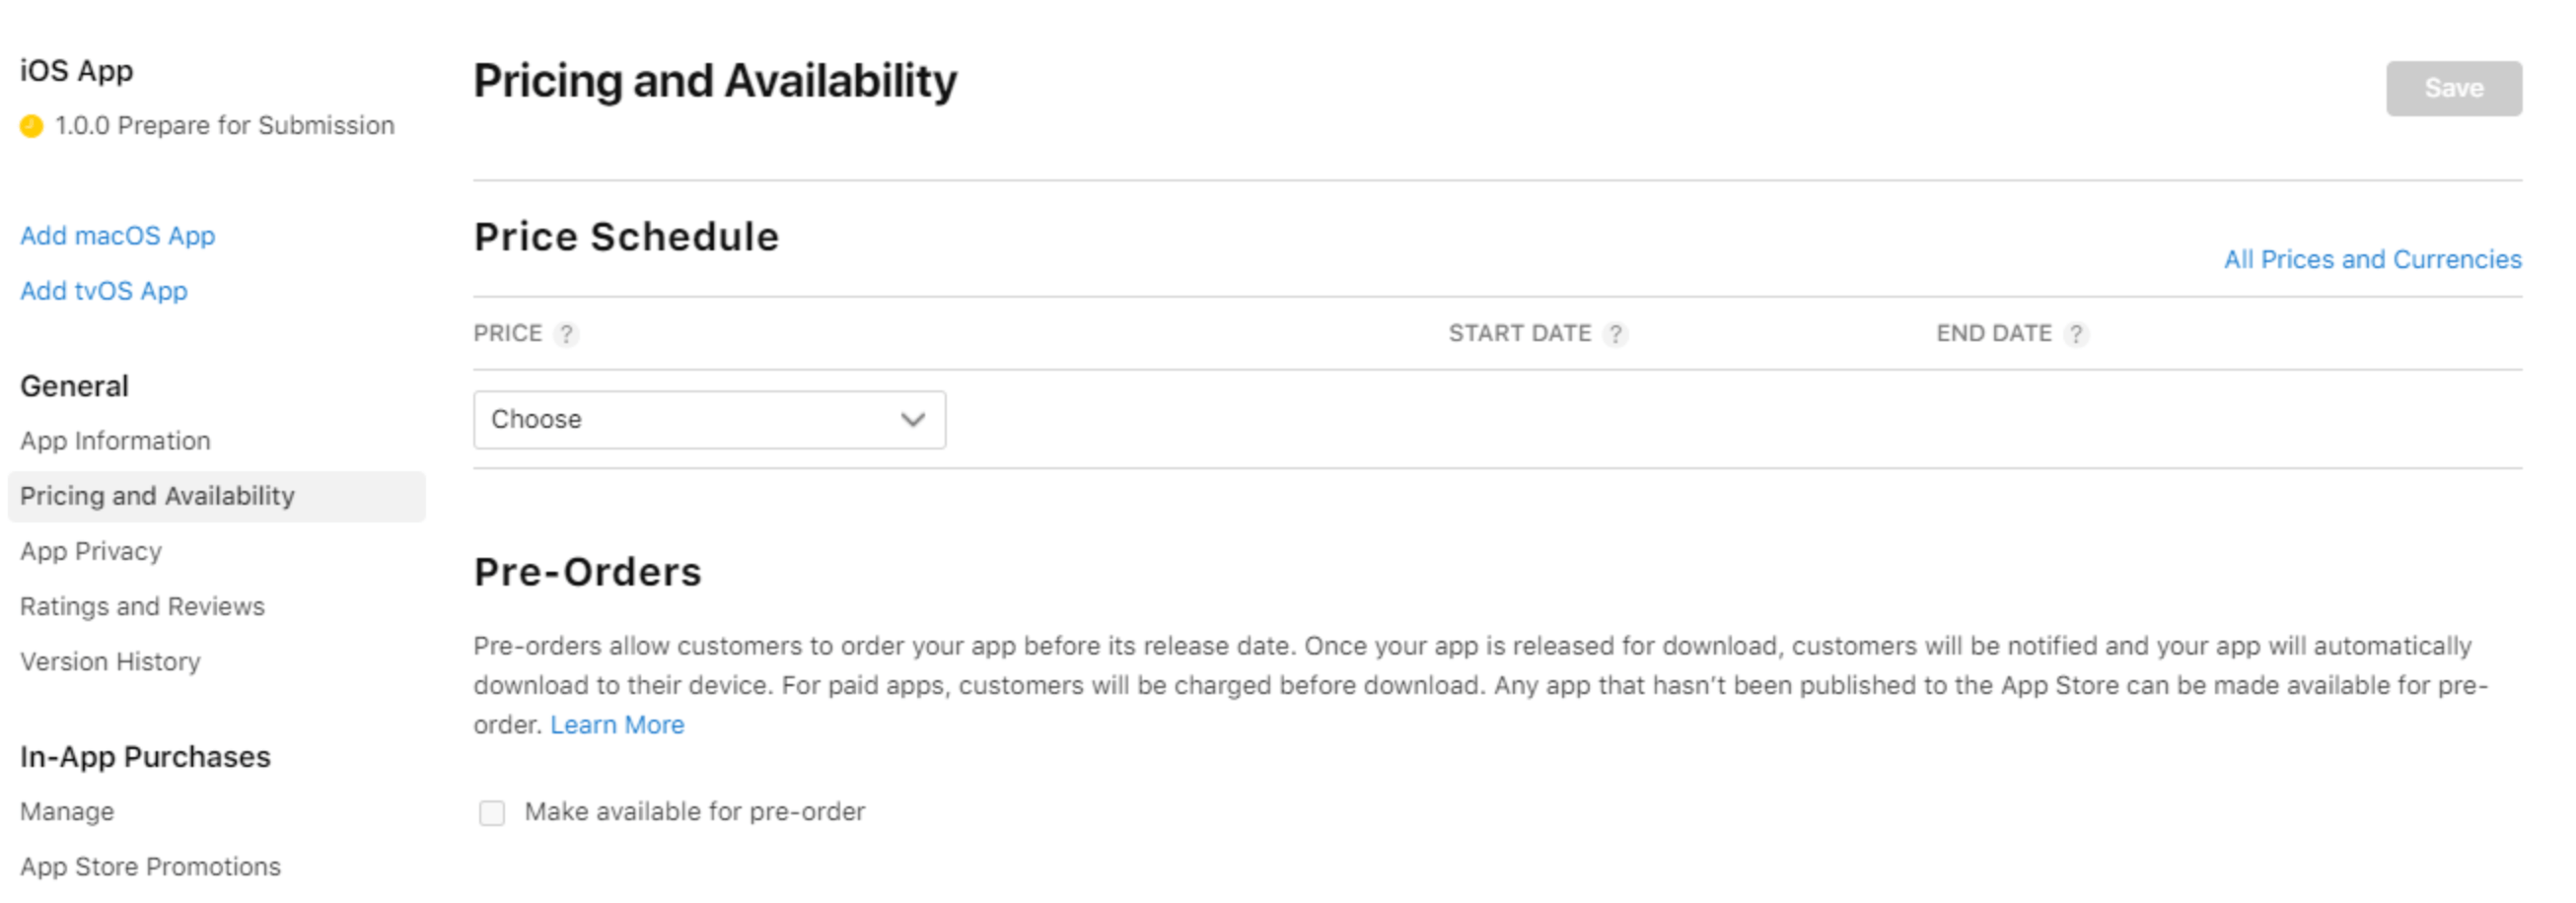 App Pricing and Availability in AppStore